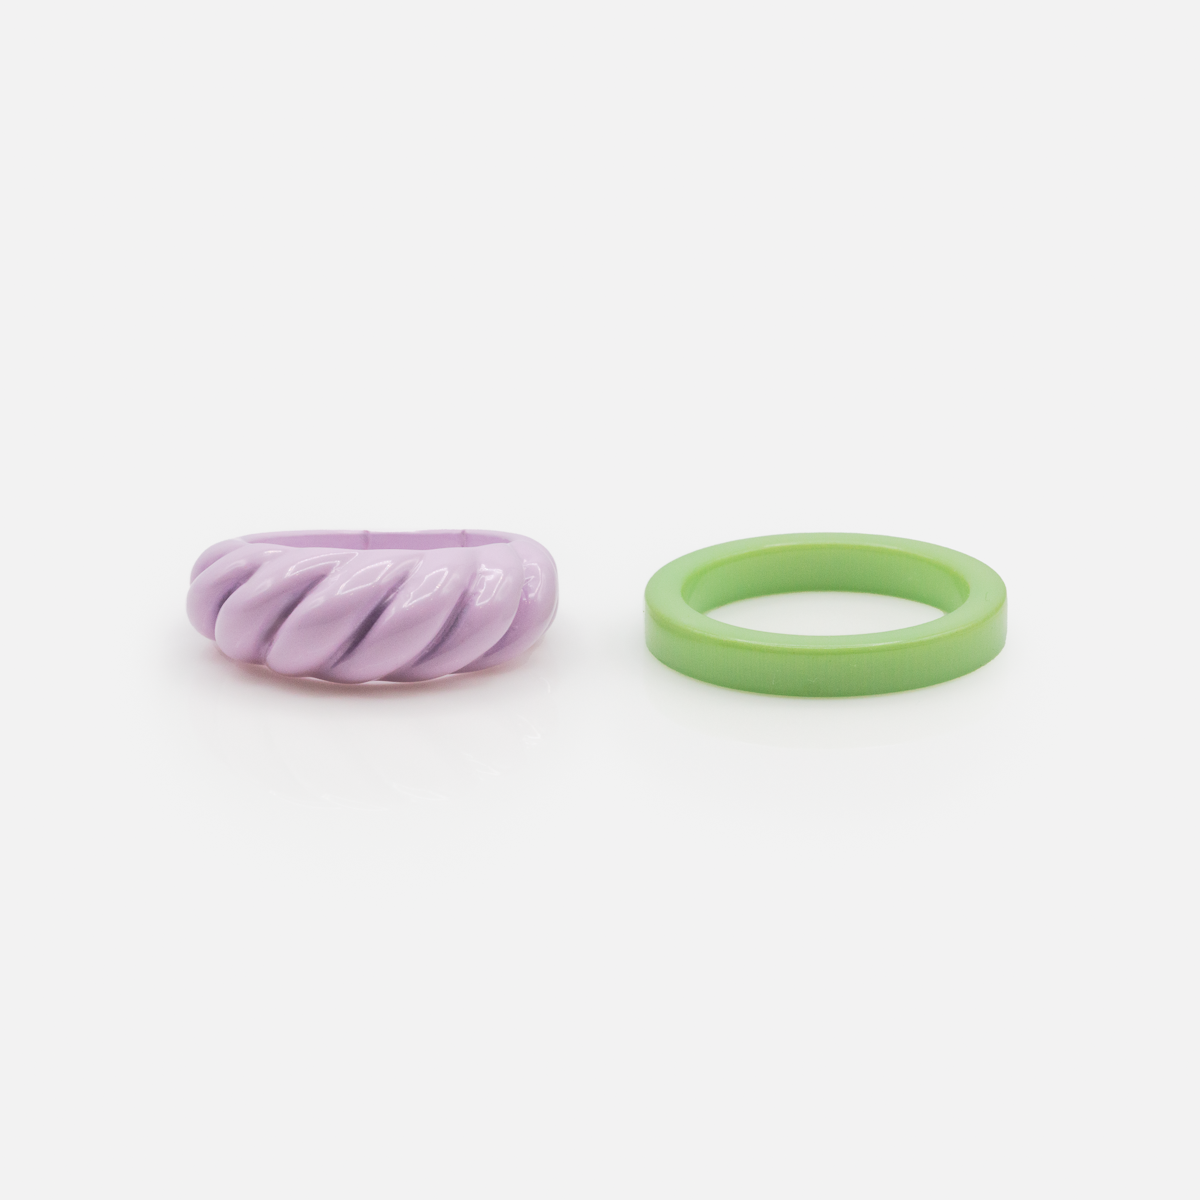 Duo of purple and green acrylic rings